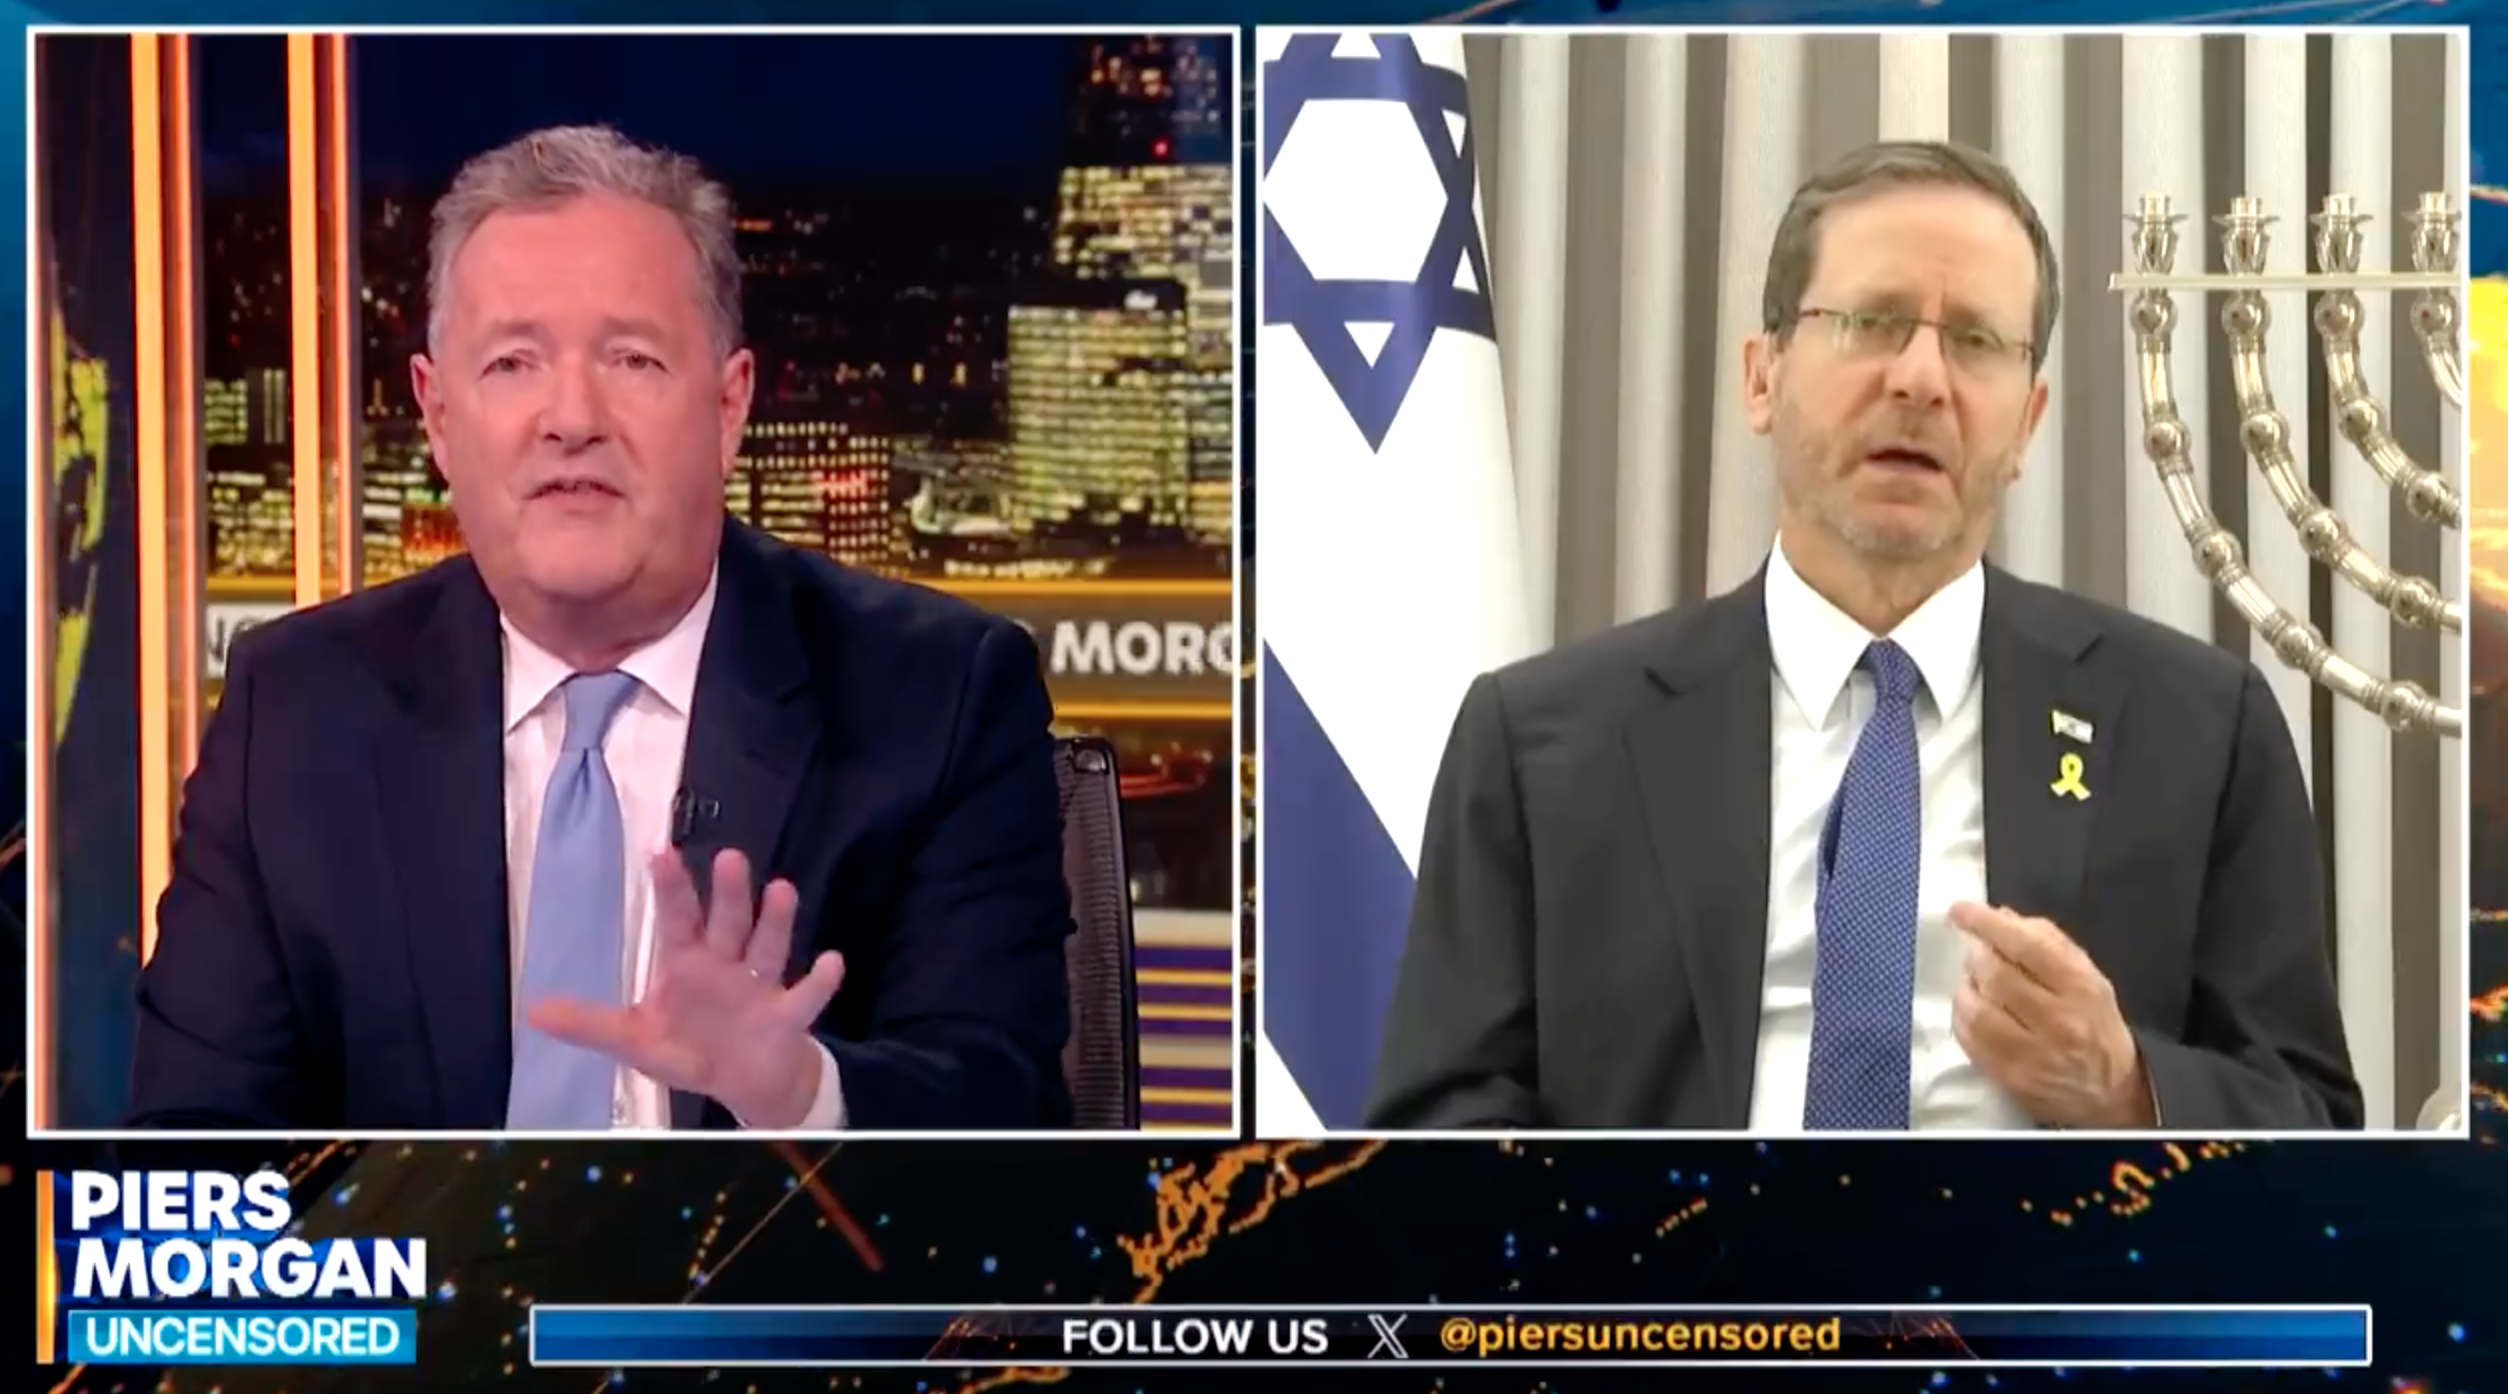 Piers Morgan Calls Out Israeli President For Attacking Press Freedom, Demands Independent Media Access To Gaza